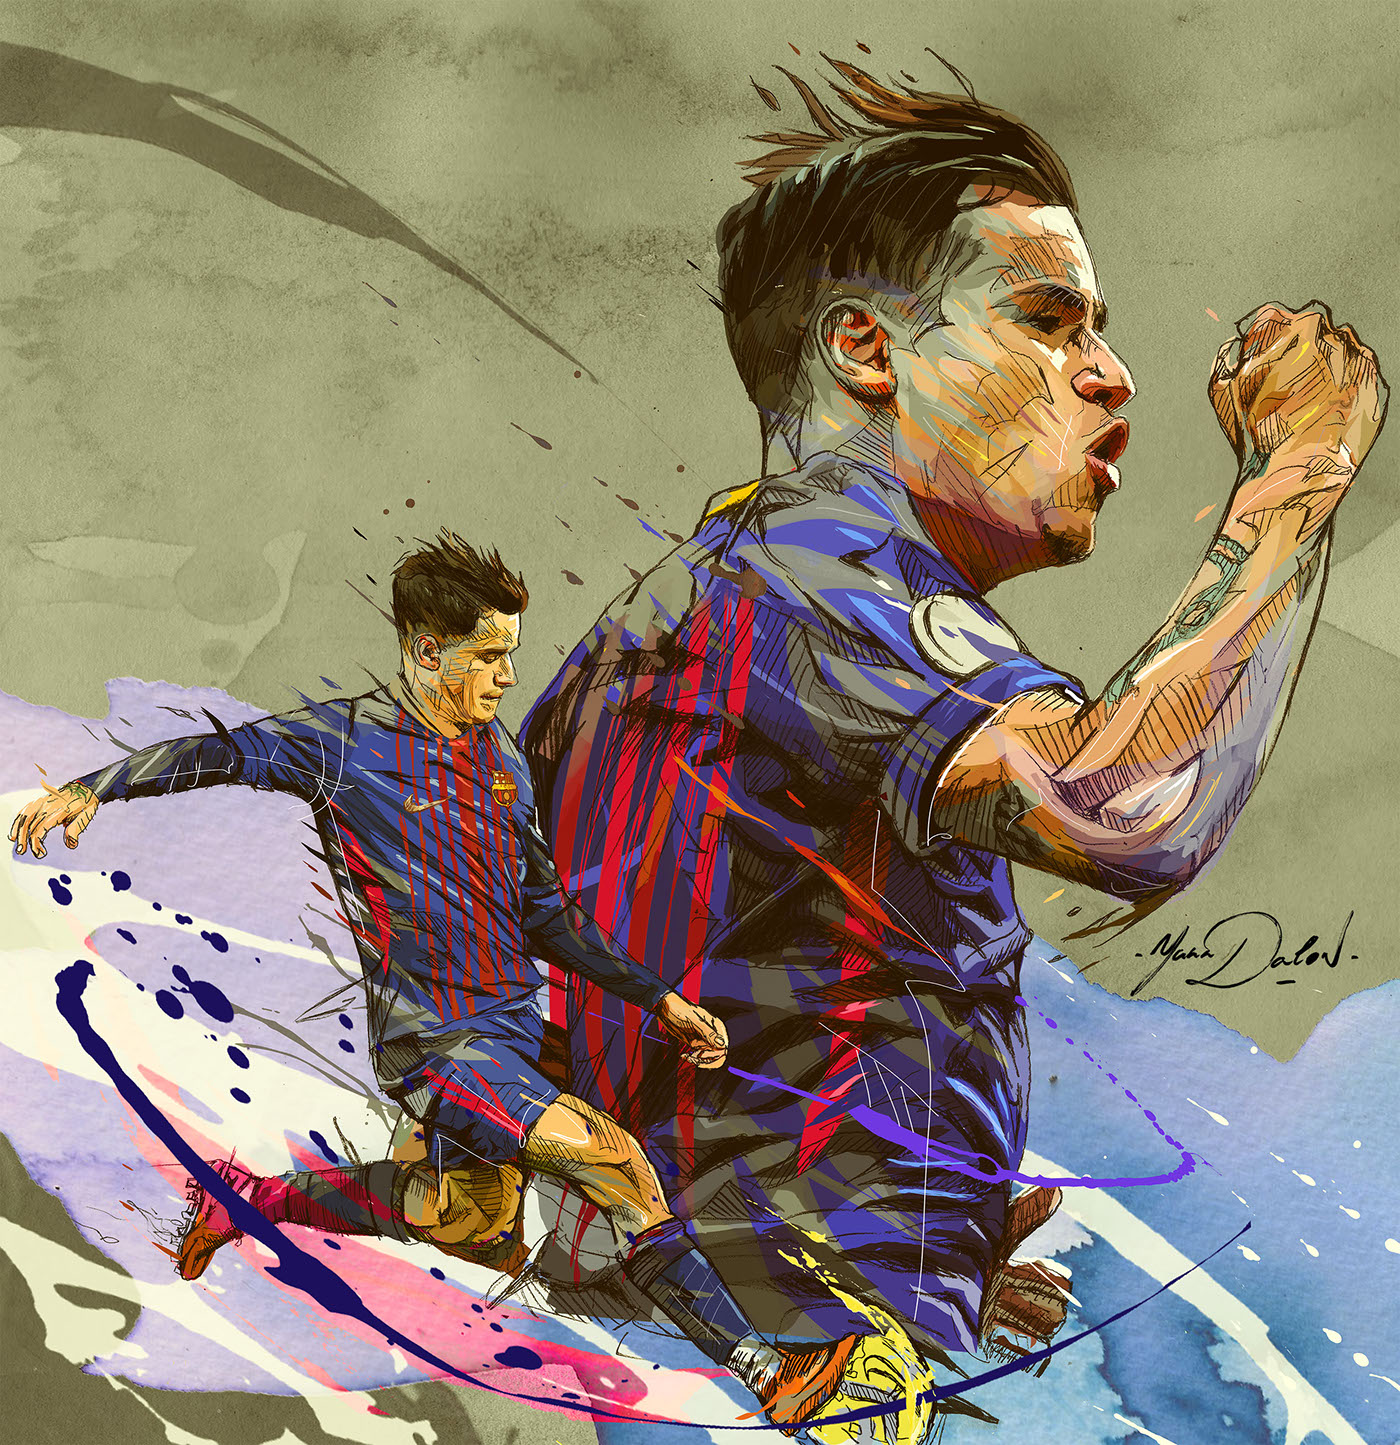 FC Barcelona lionel messi andres iniesta Philip Coutinho soccer football FIFA World Cup champion's league dynamic portrait movement